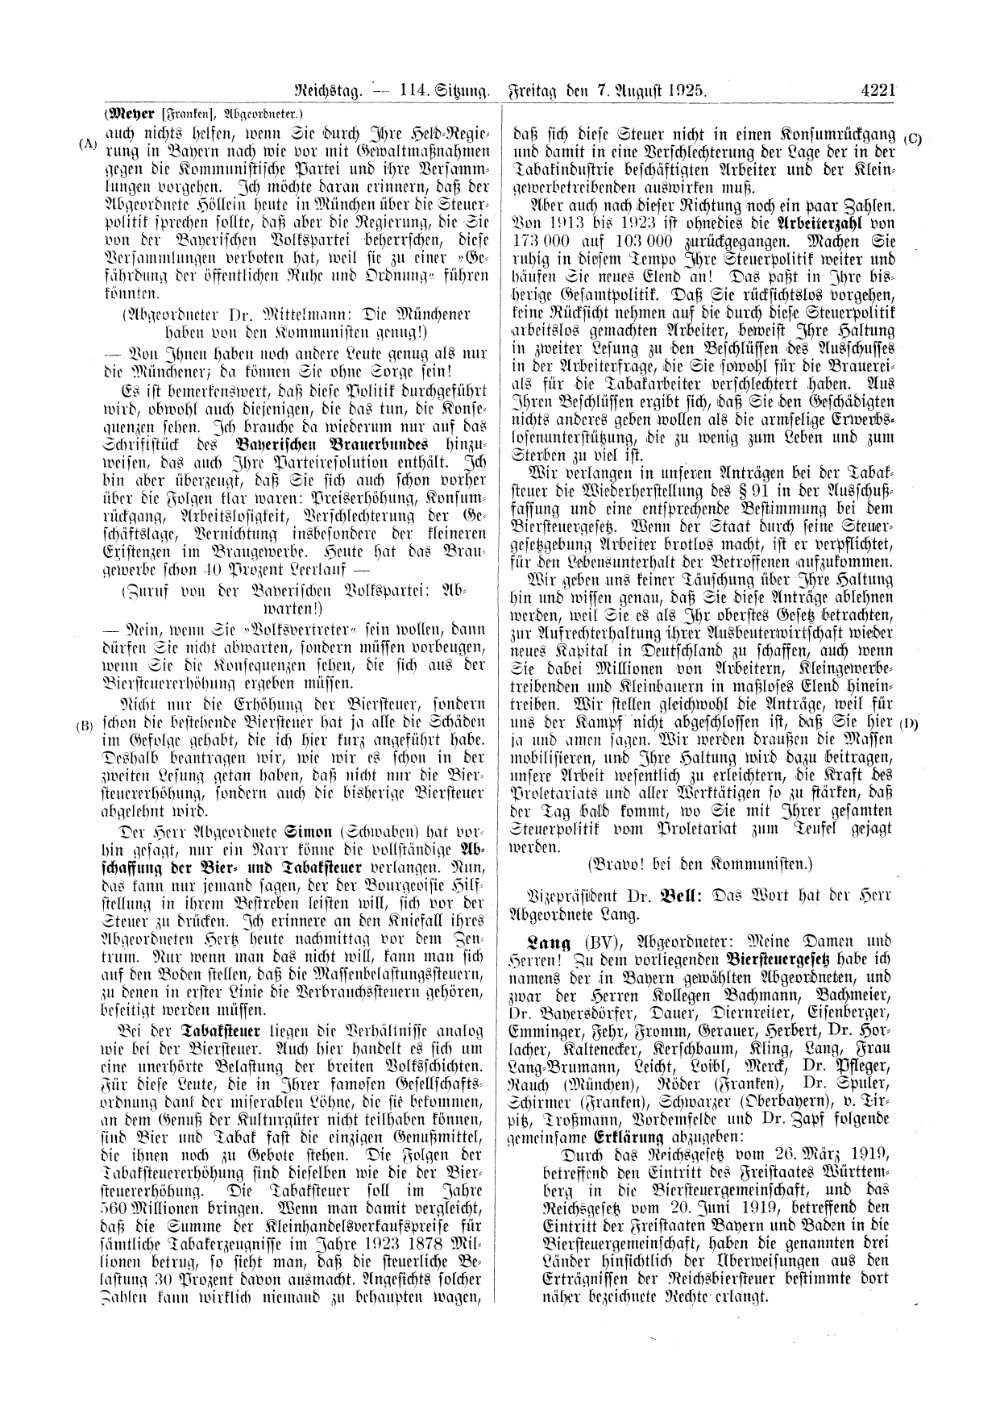 Scan of page 4221